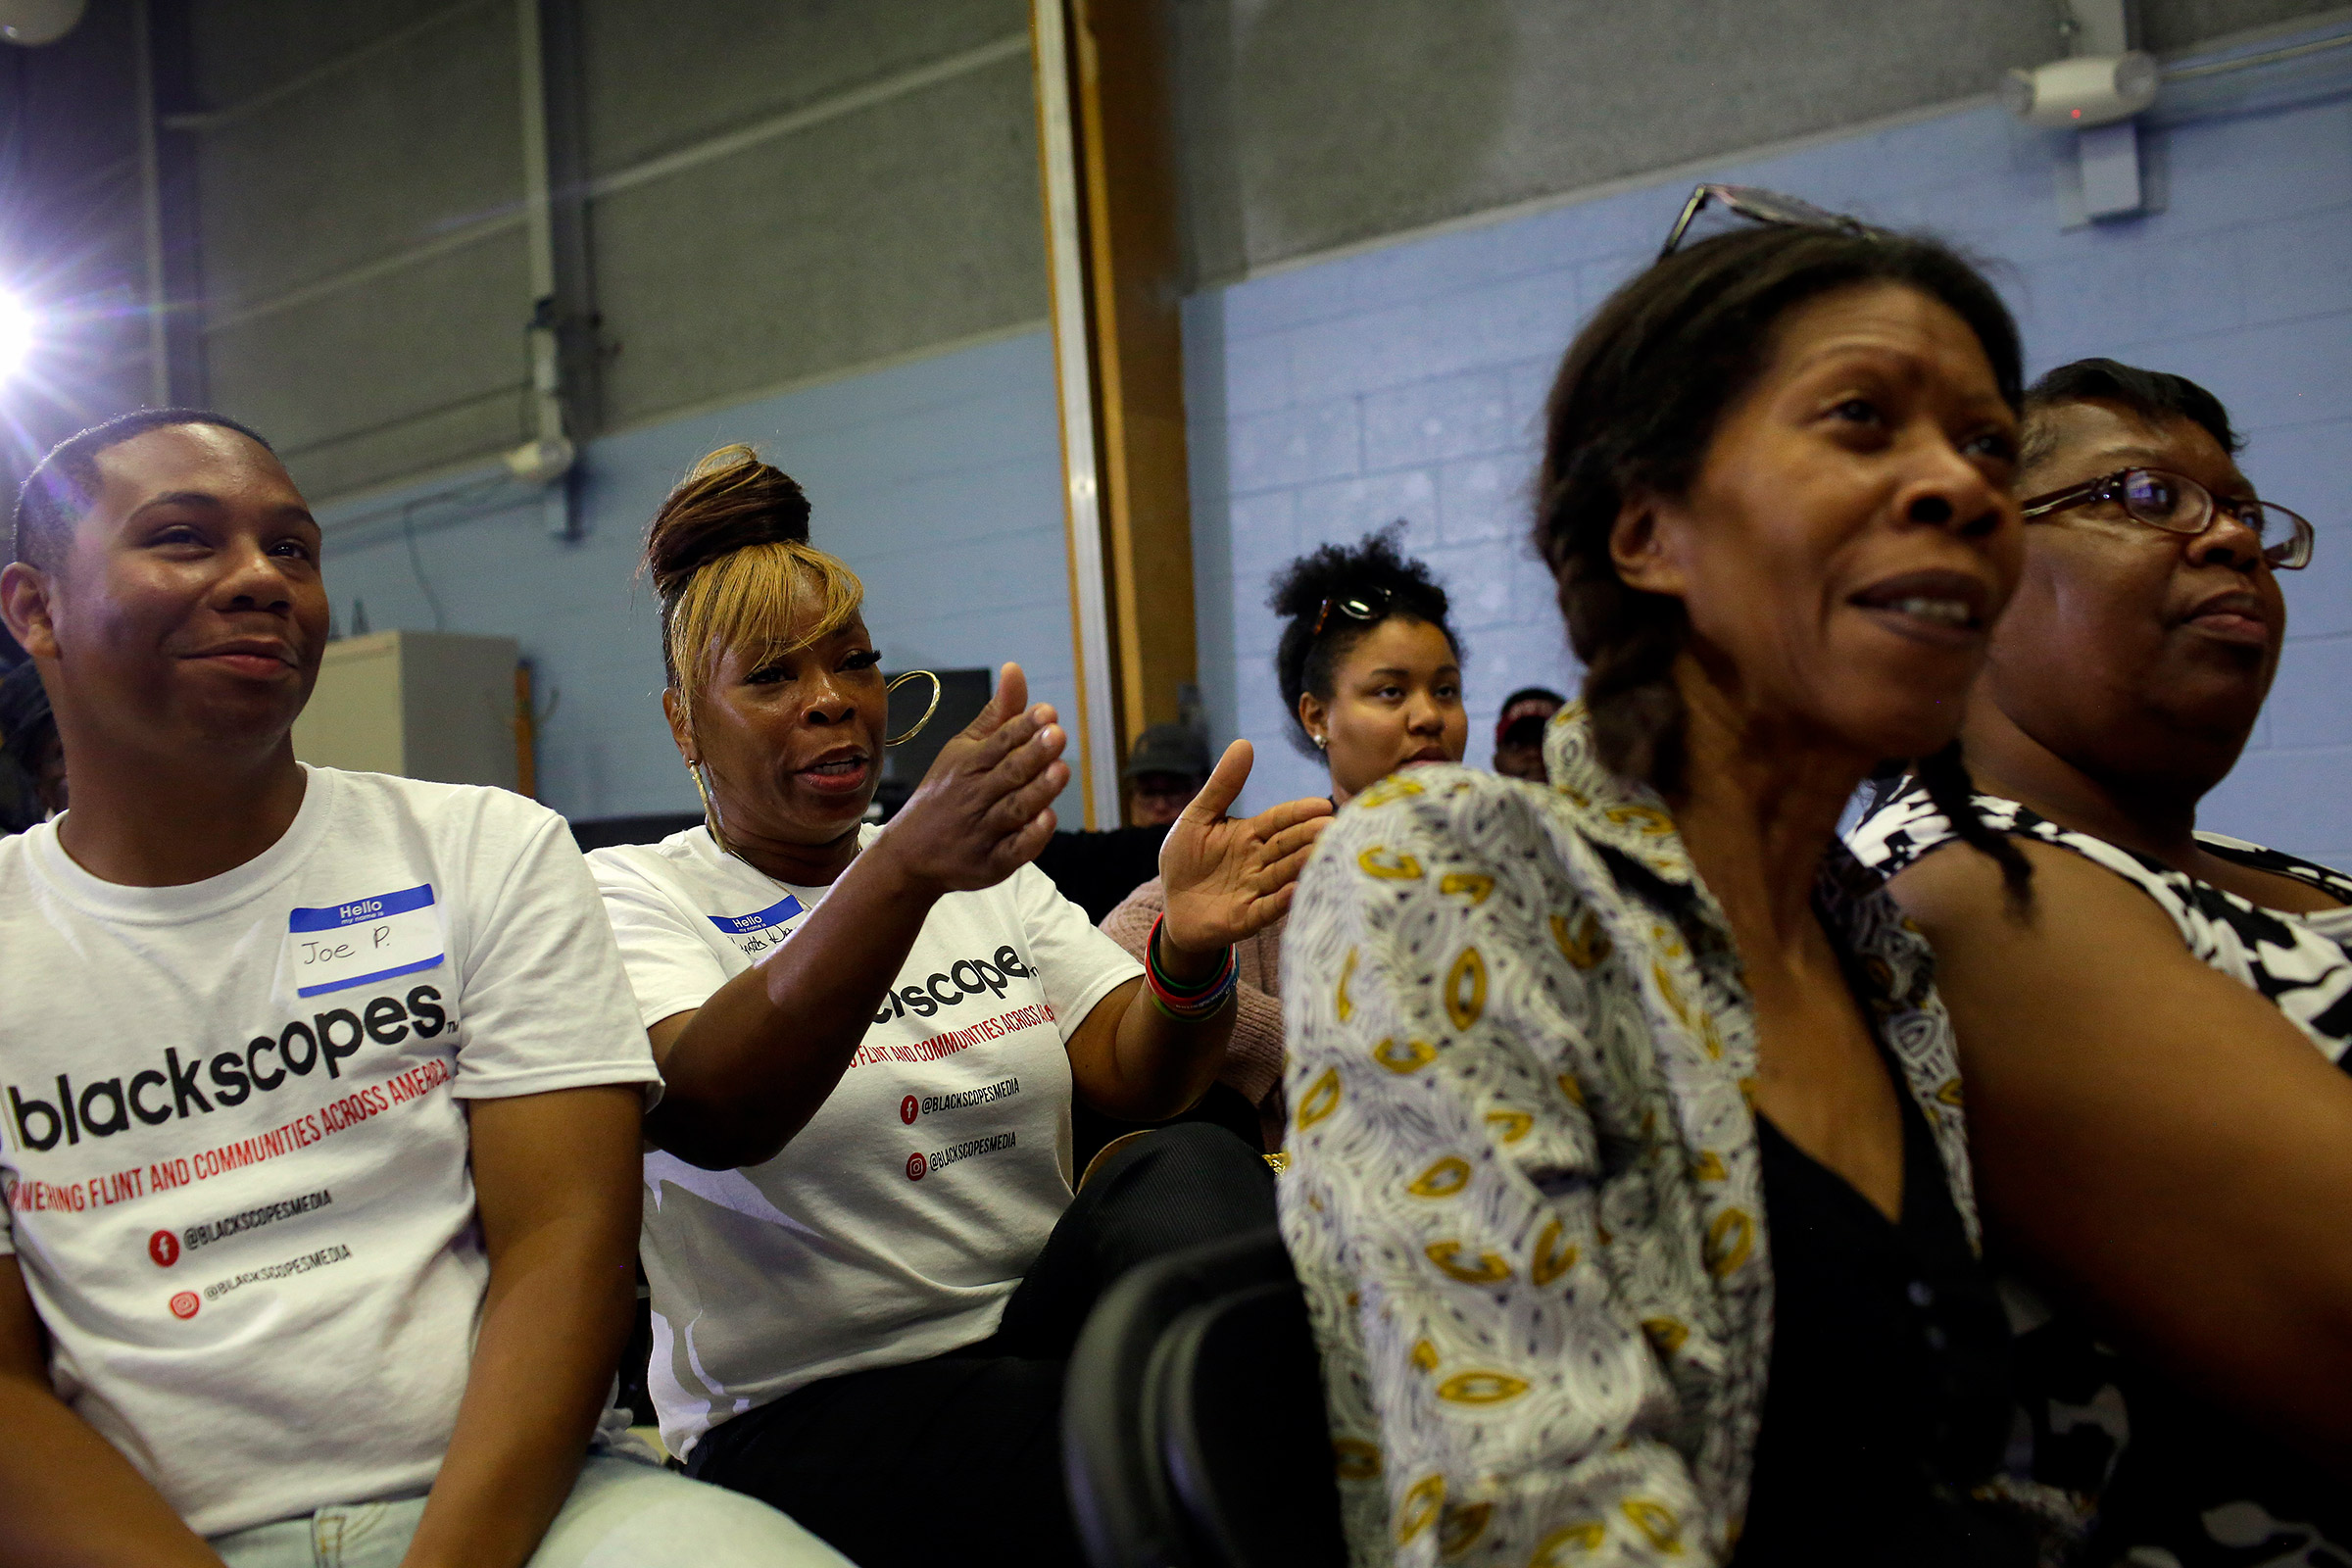 The voters at the watch party hosted by Black Voters Matter— a voter mobilization and advocacy organization— seemed intrigued by the less mainstream Democrats, like businessman Andrew Yang and Rep. Tulsi Gabbard.